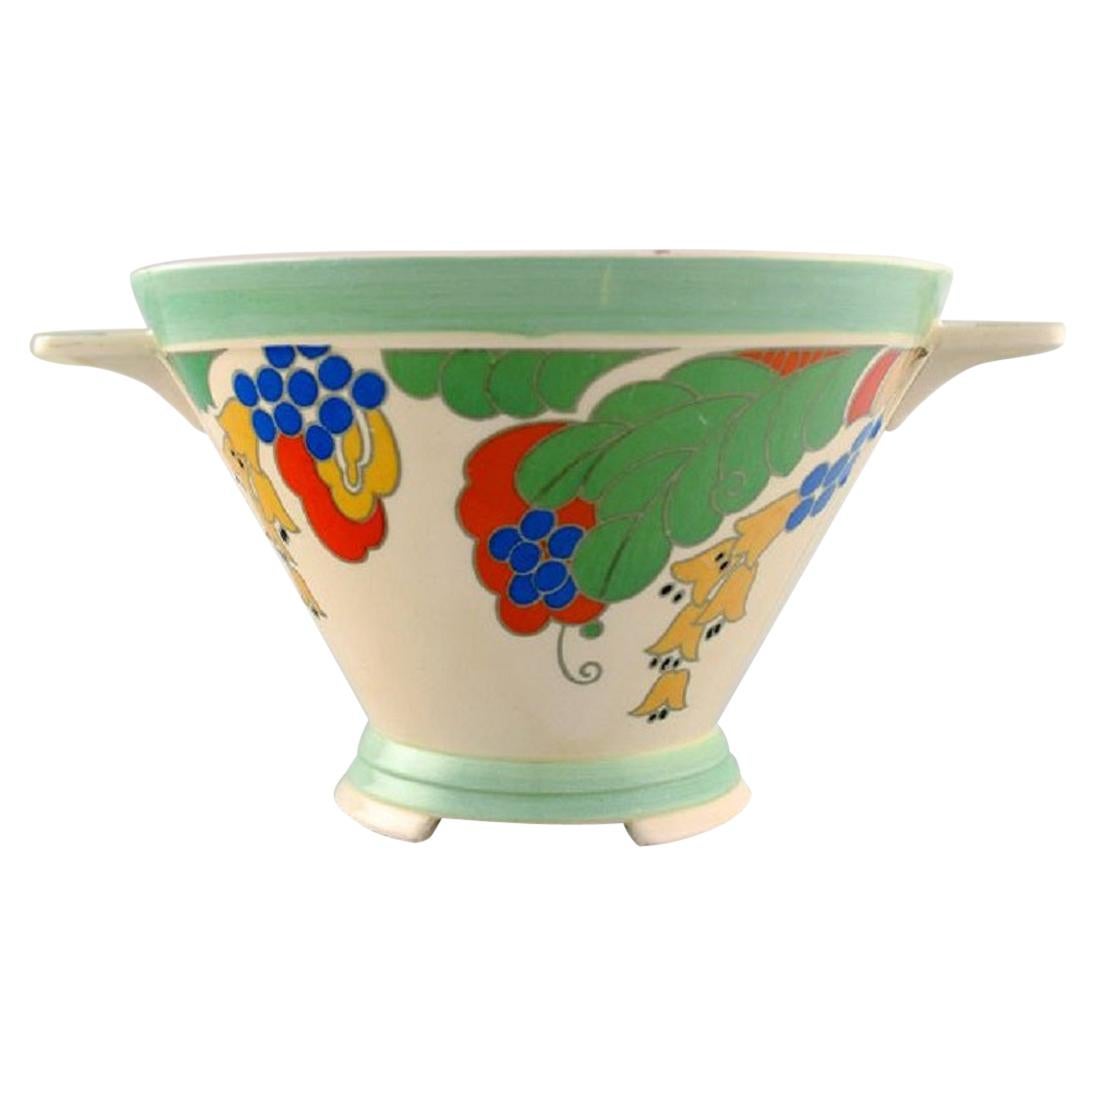 Large Art Deco Caprice Bowl in Hand Painted Porcelain, Royal Doulton, England